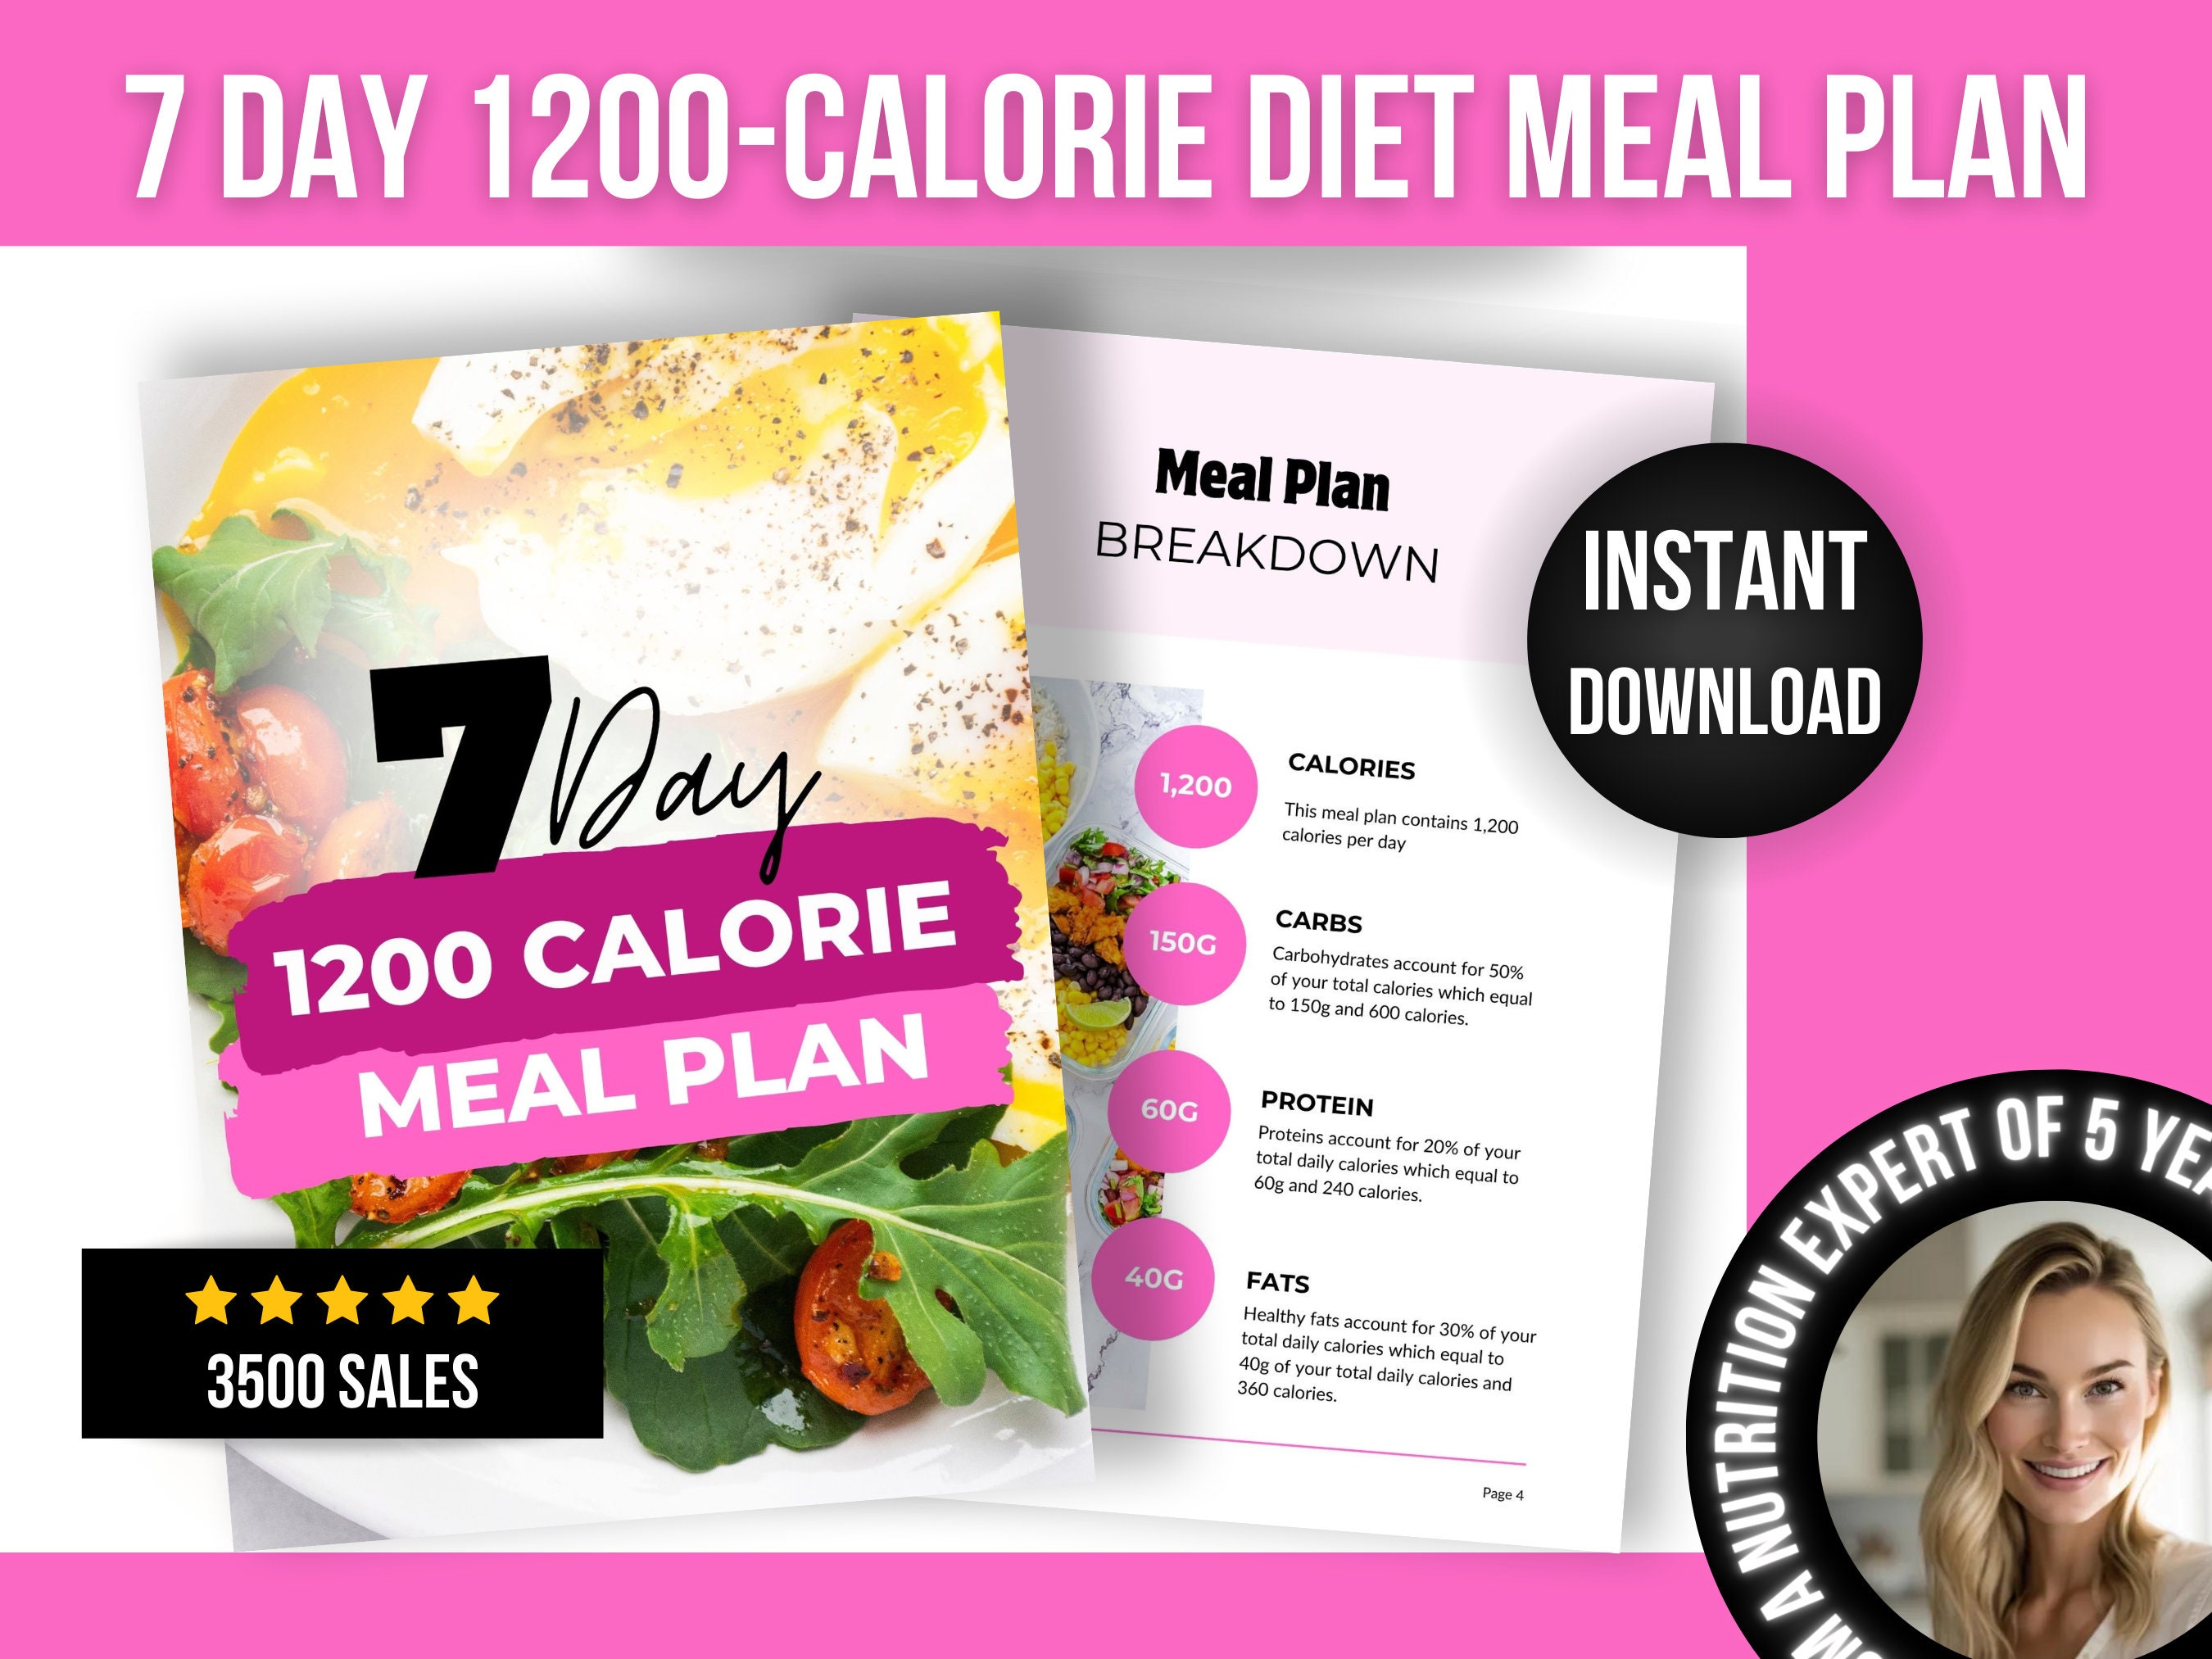 The Complete New Dr. Nowzaradan Diet Plan 2022: Simple, Delicious